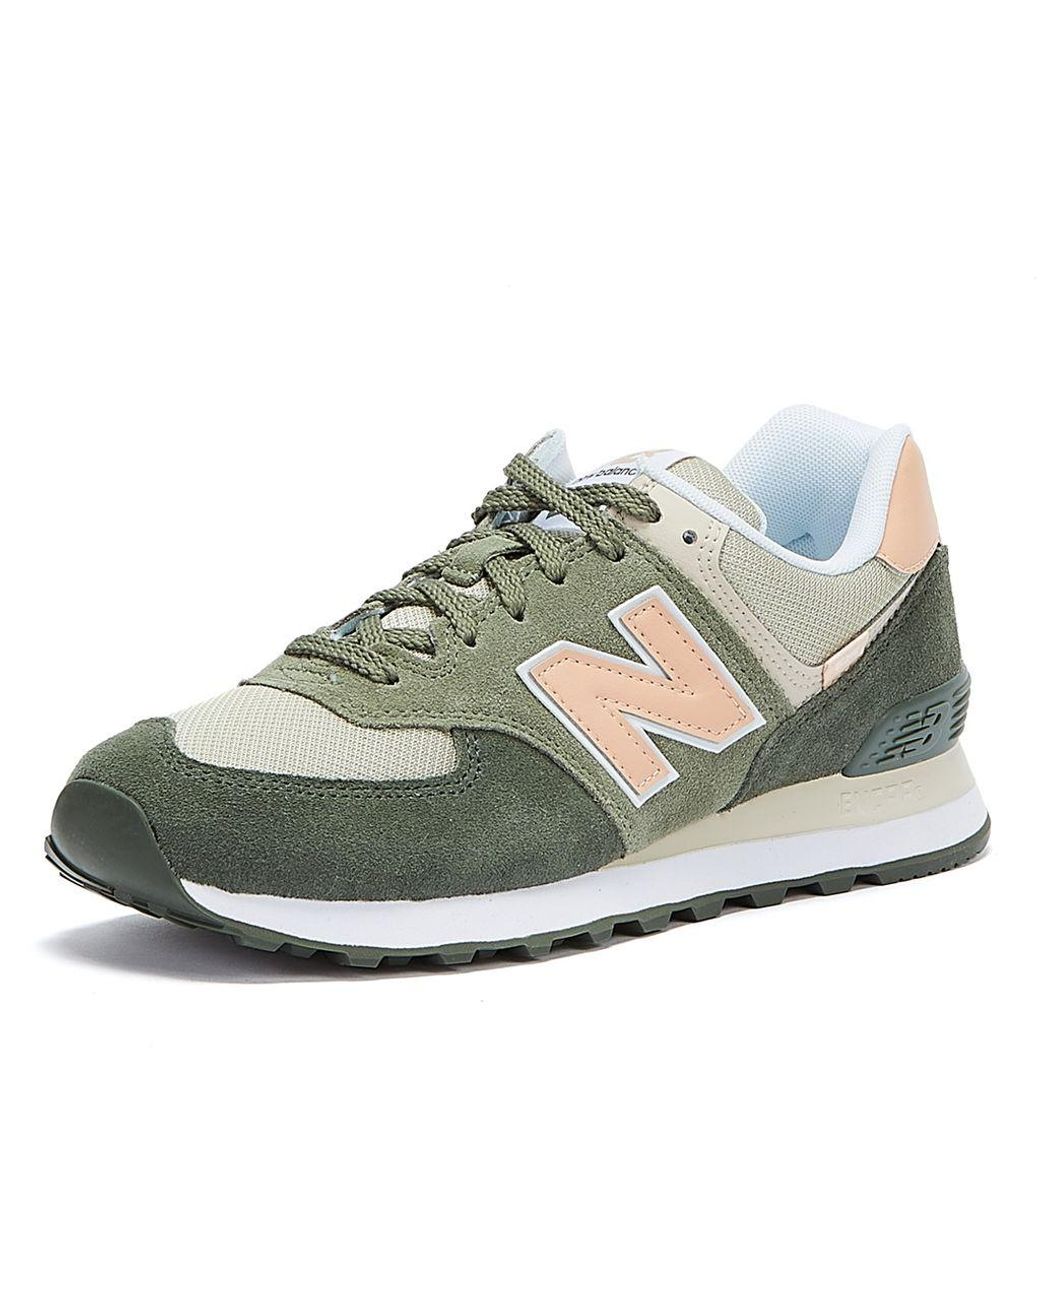 New Balance 574 Black Spruce / Silver Pine Trainers in Green | Lyst